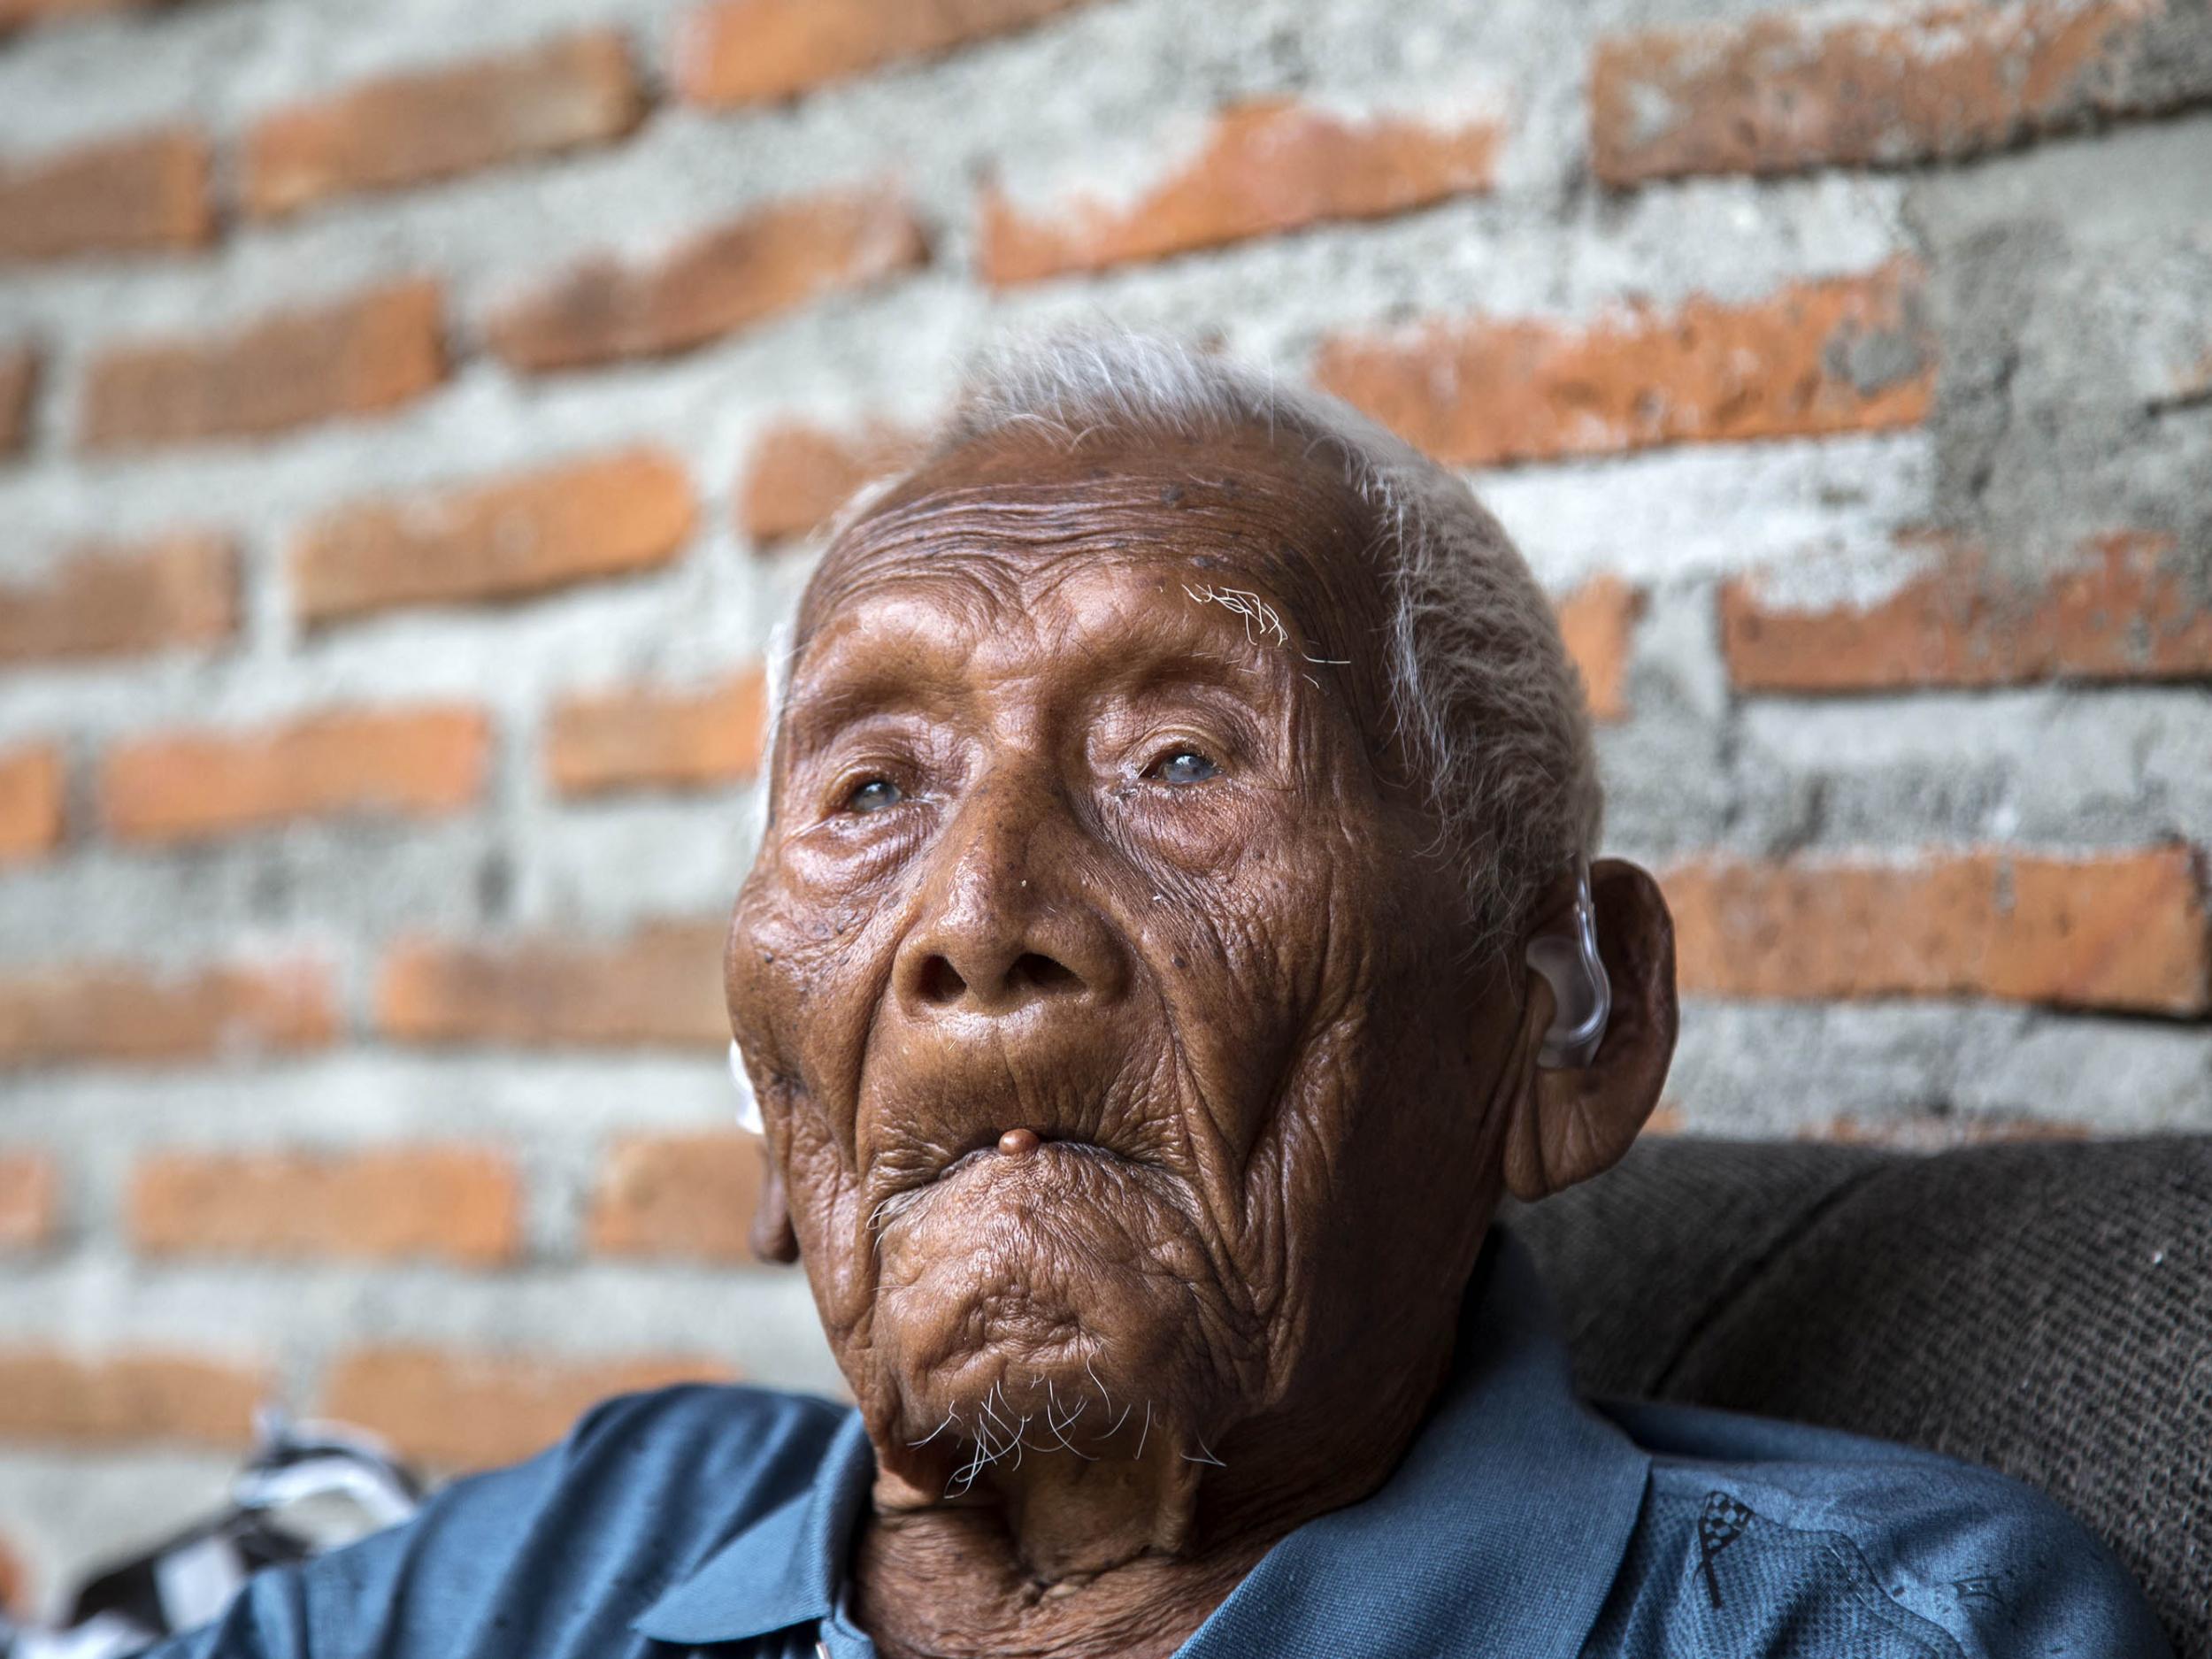 Who is the oldest person alive?